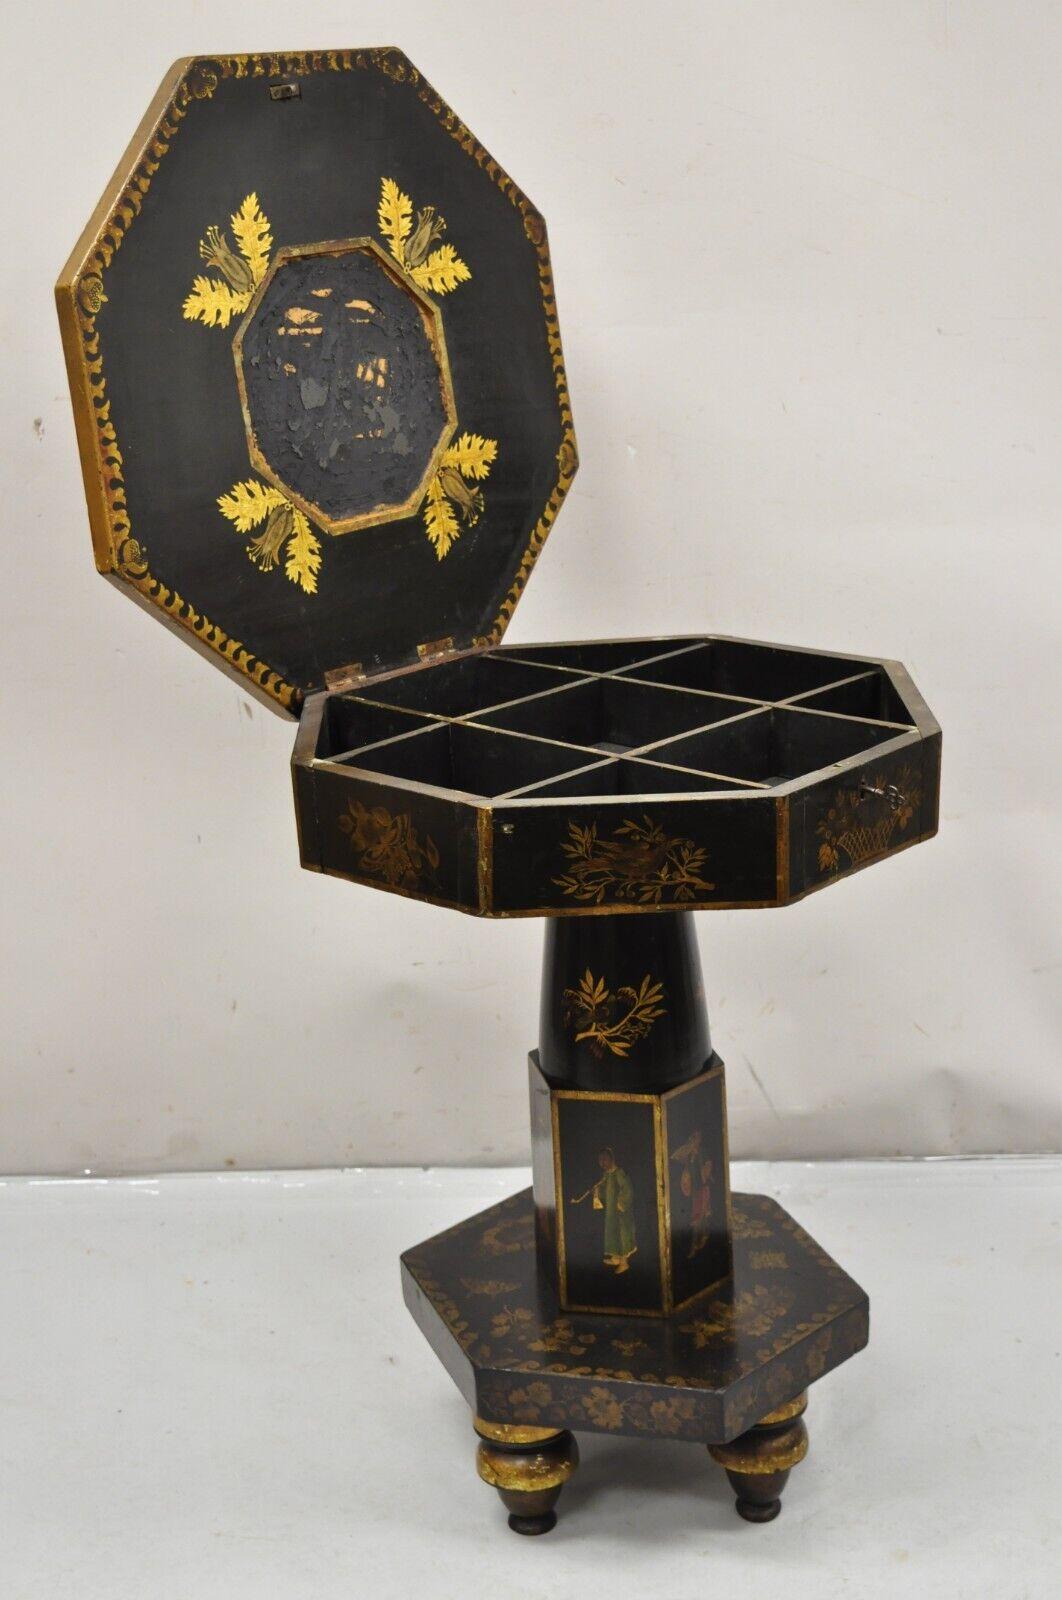 Antique Chinoiserie Gold Gilt Hand Painted Japanned Pedestal Sewing Stand Table. Item features a flip top with fitted interior, gold gilt hand painted details throughout, figural painted top and pedestal base, raised on turn carved feet, original